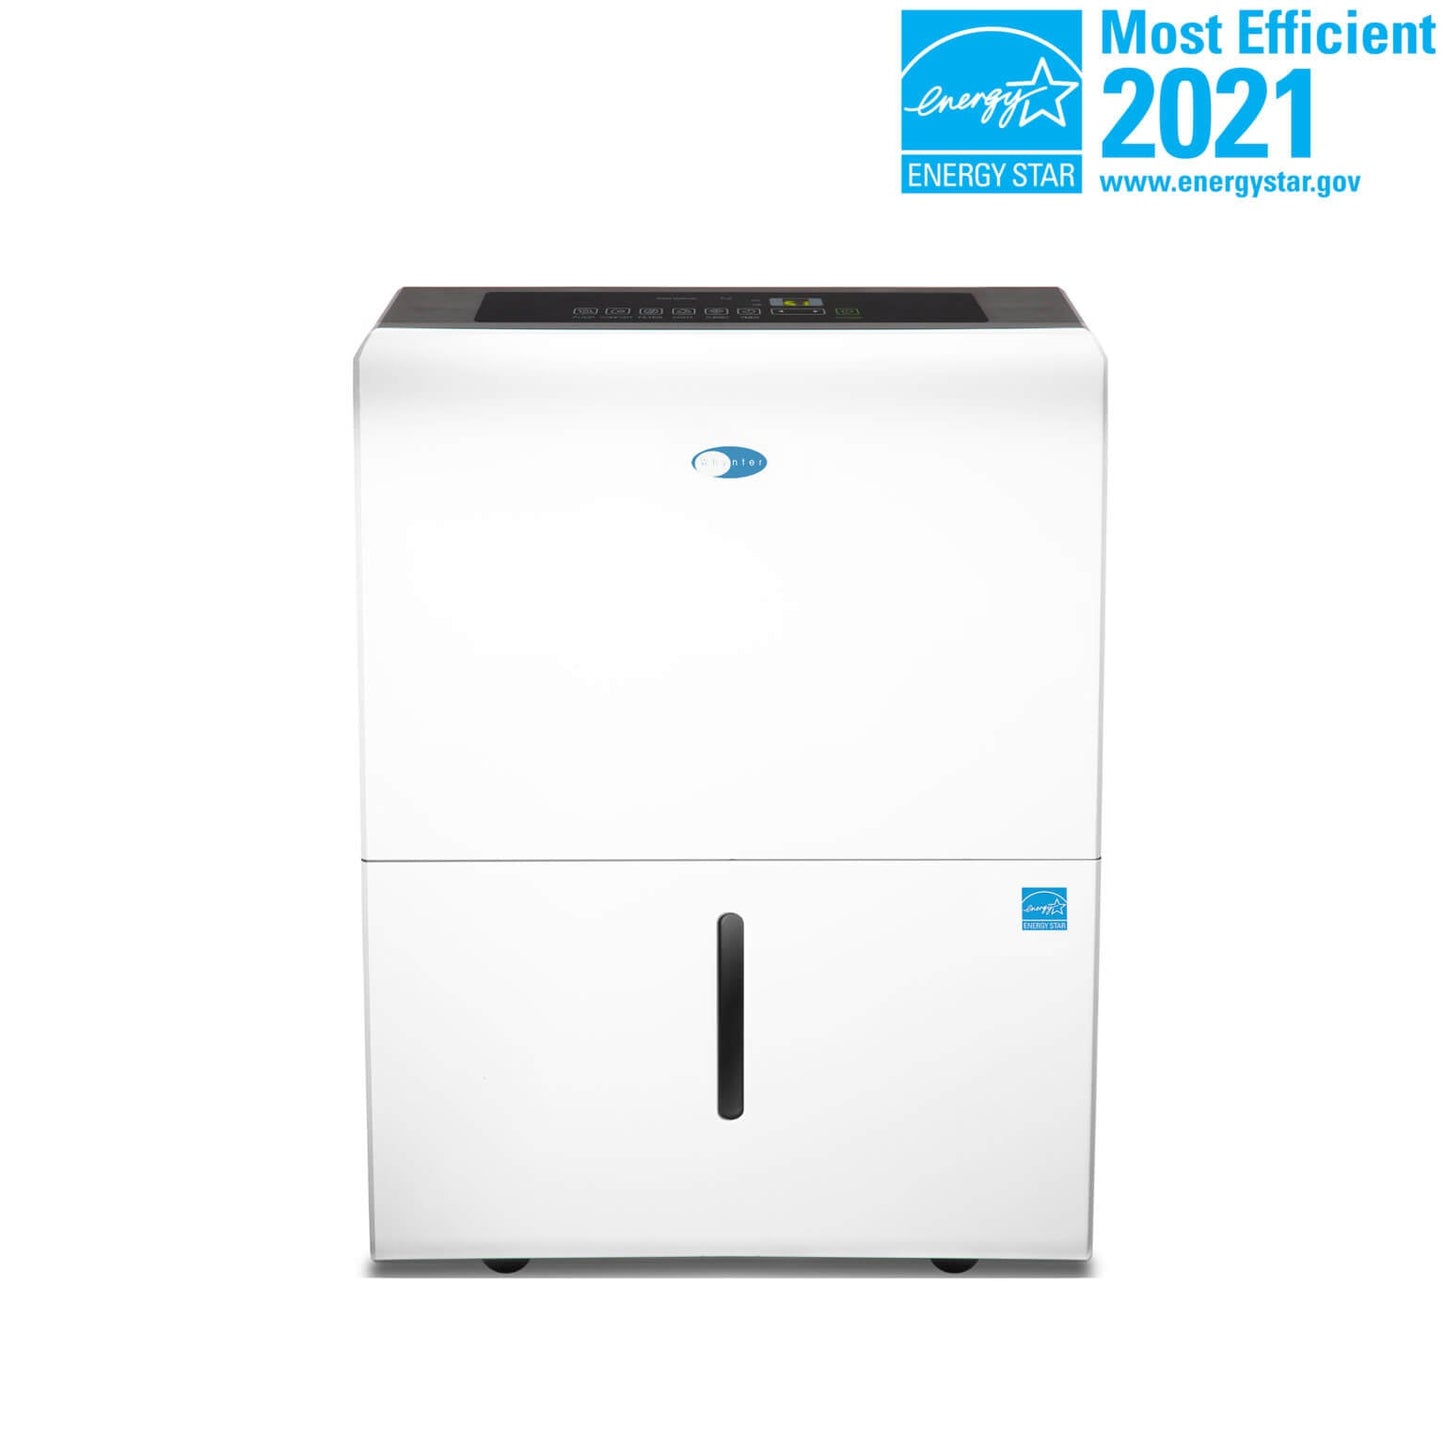 Whynter Dehumidifiers Whynter RPD-506EWP ENERGY STAR Most Efficient 2021 50 Pint High Capacity Portable Dehumidifier with Pump for up to 4000 sq ft